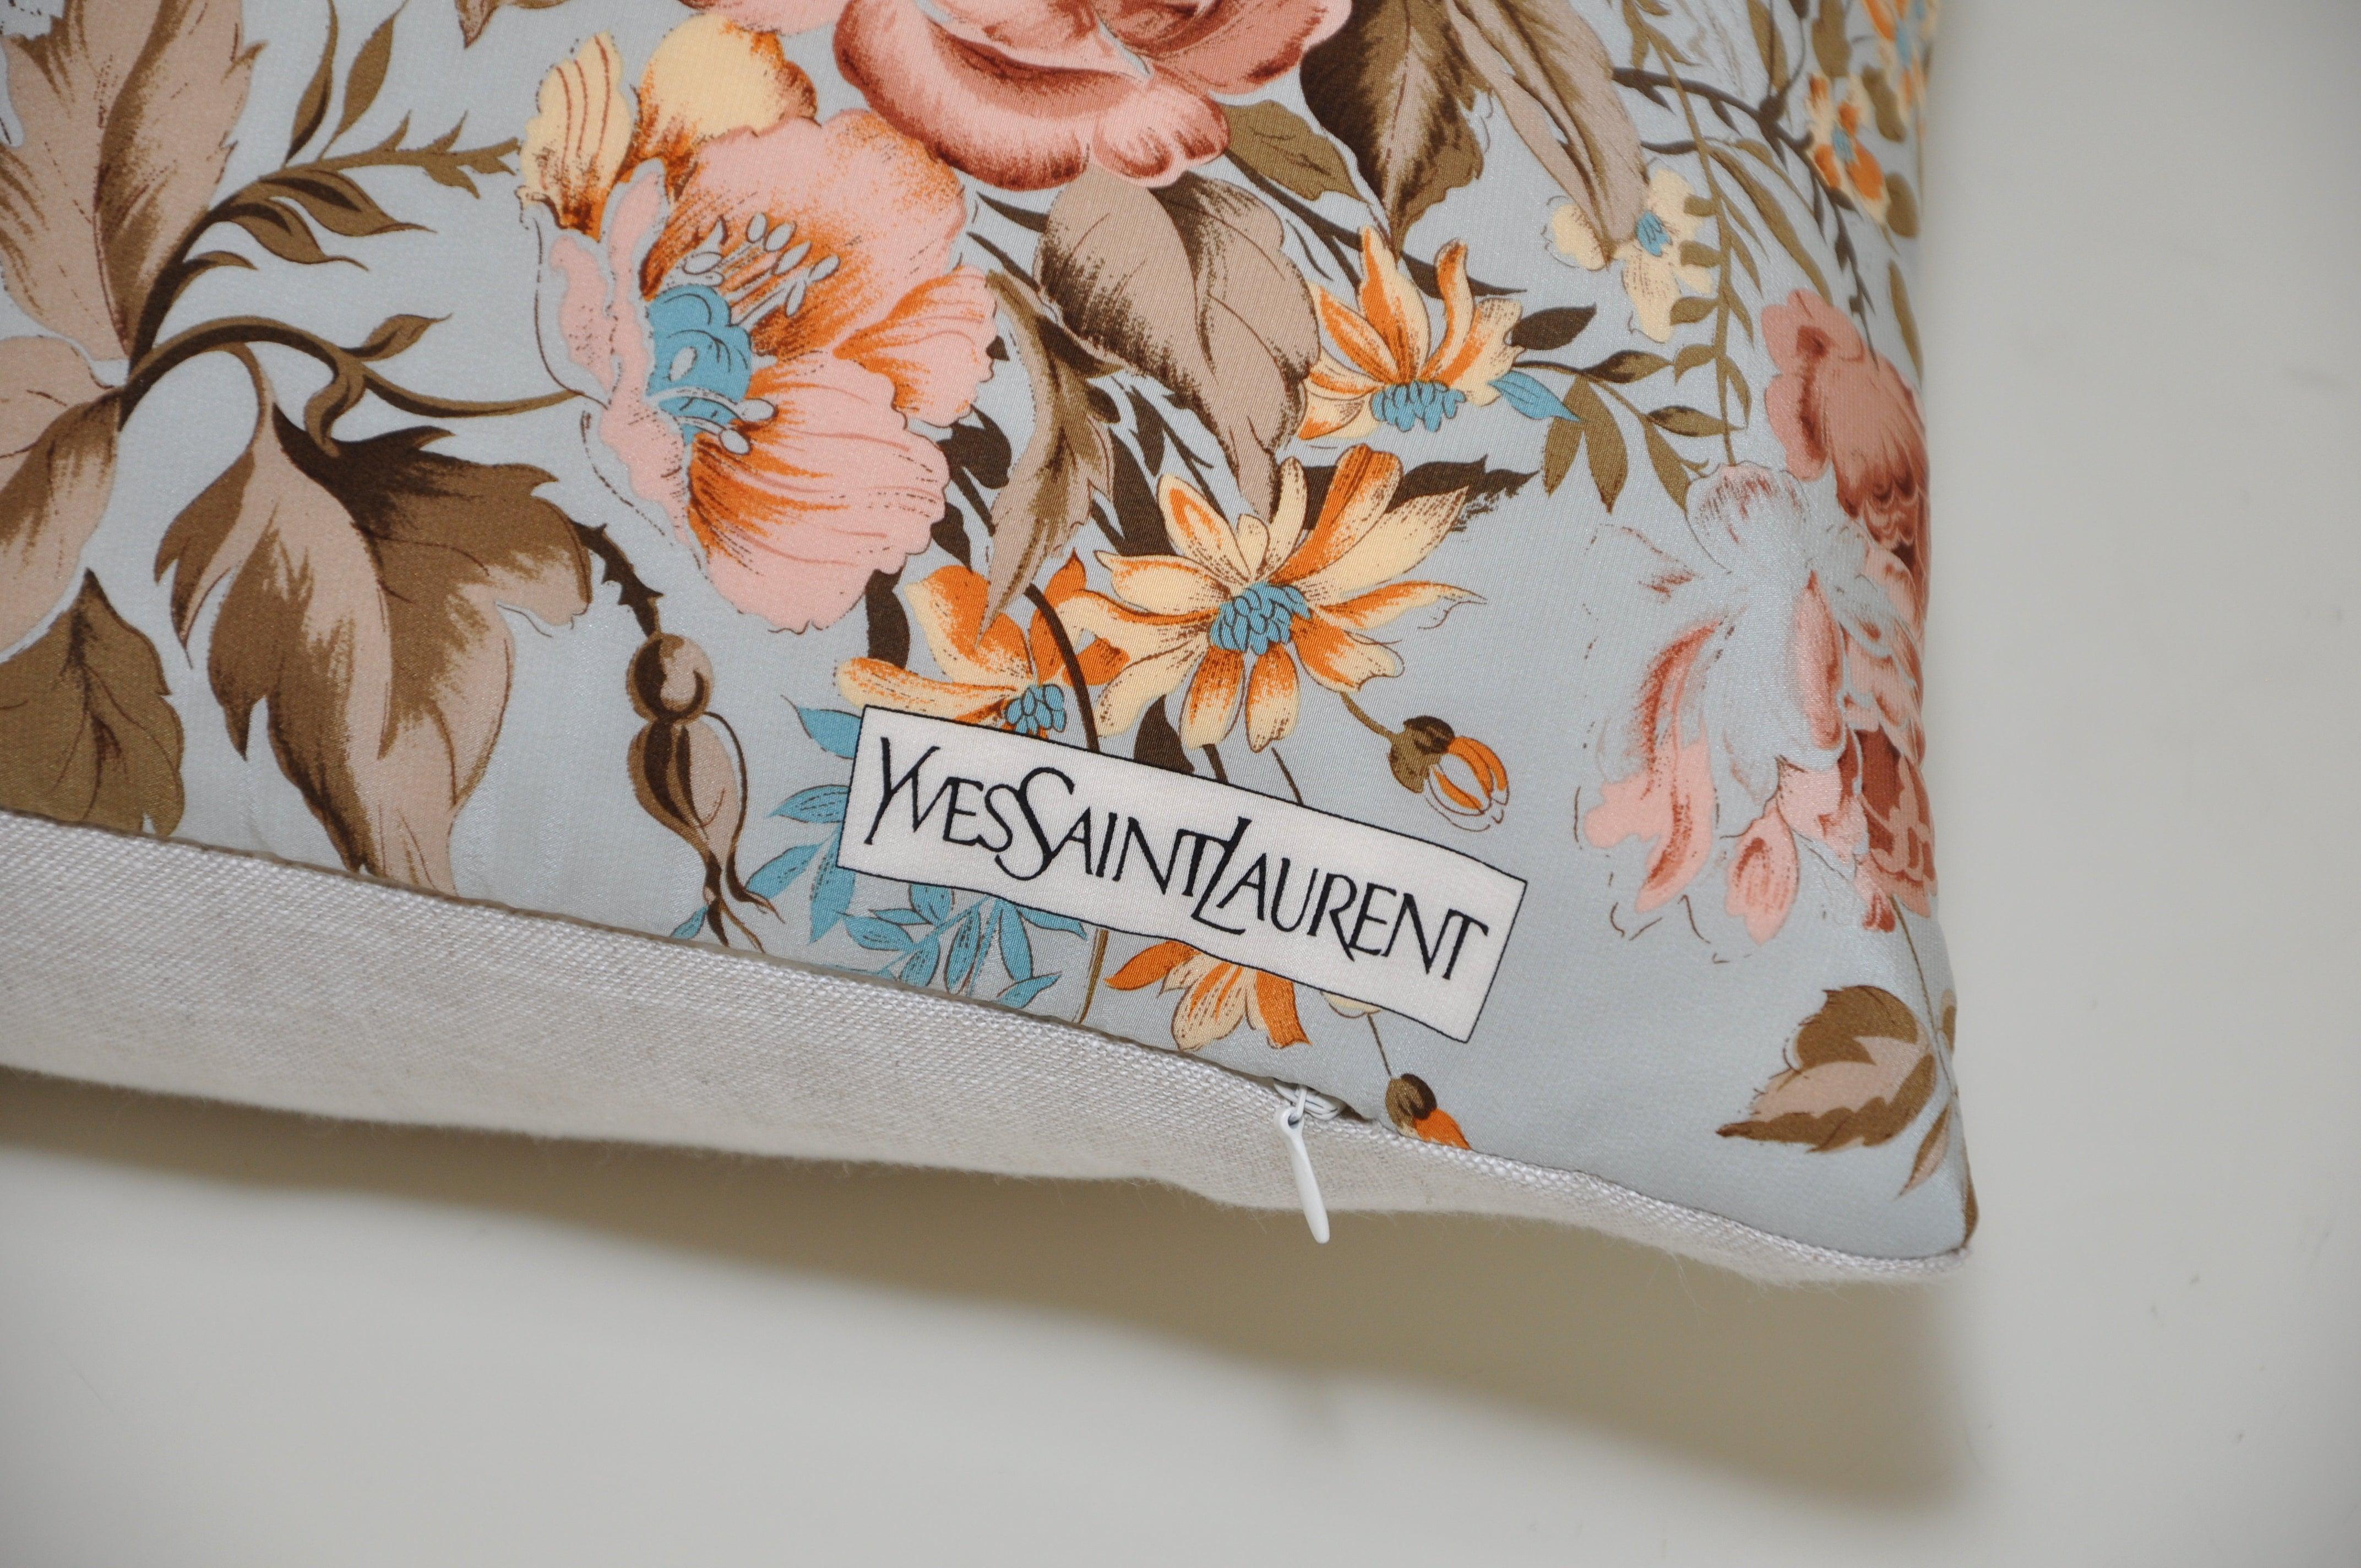 Vintage silk YSL French fabric blue pink pillow cushion large with Irish linen this cushion is a one of a kind and part of a sustainability project. It has been created from an up-cycled, recycled luxury fabric, used with the intentions of promoting